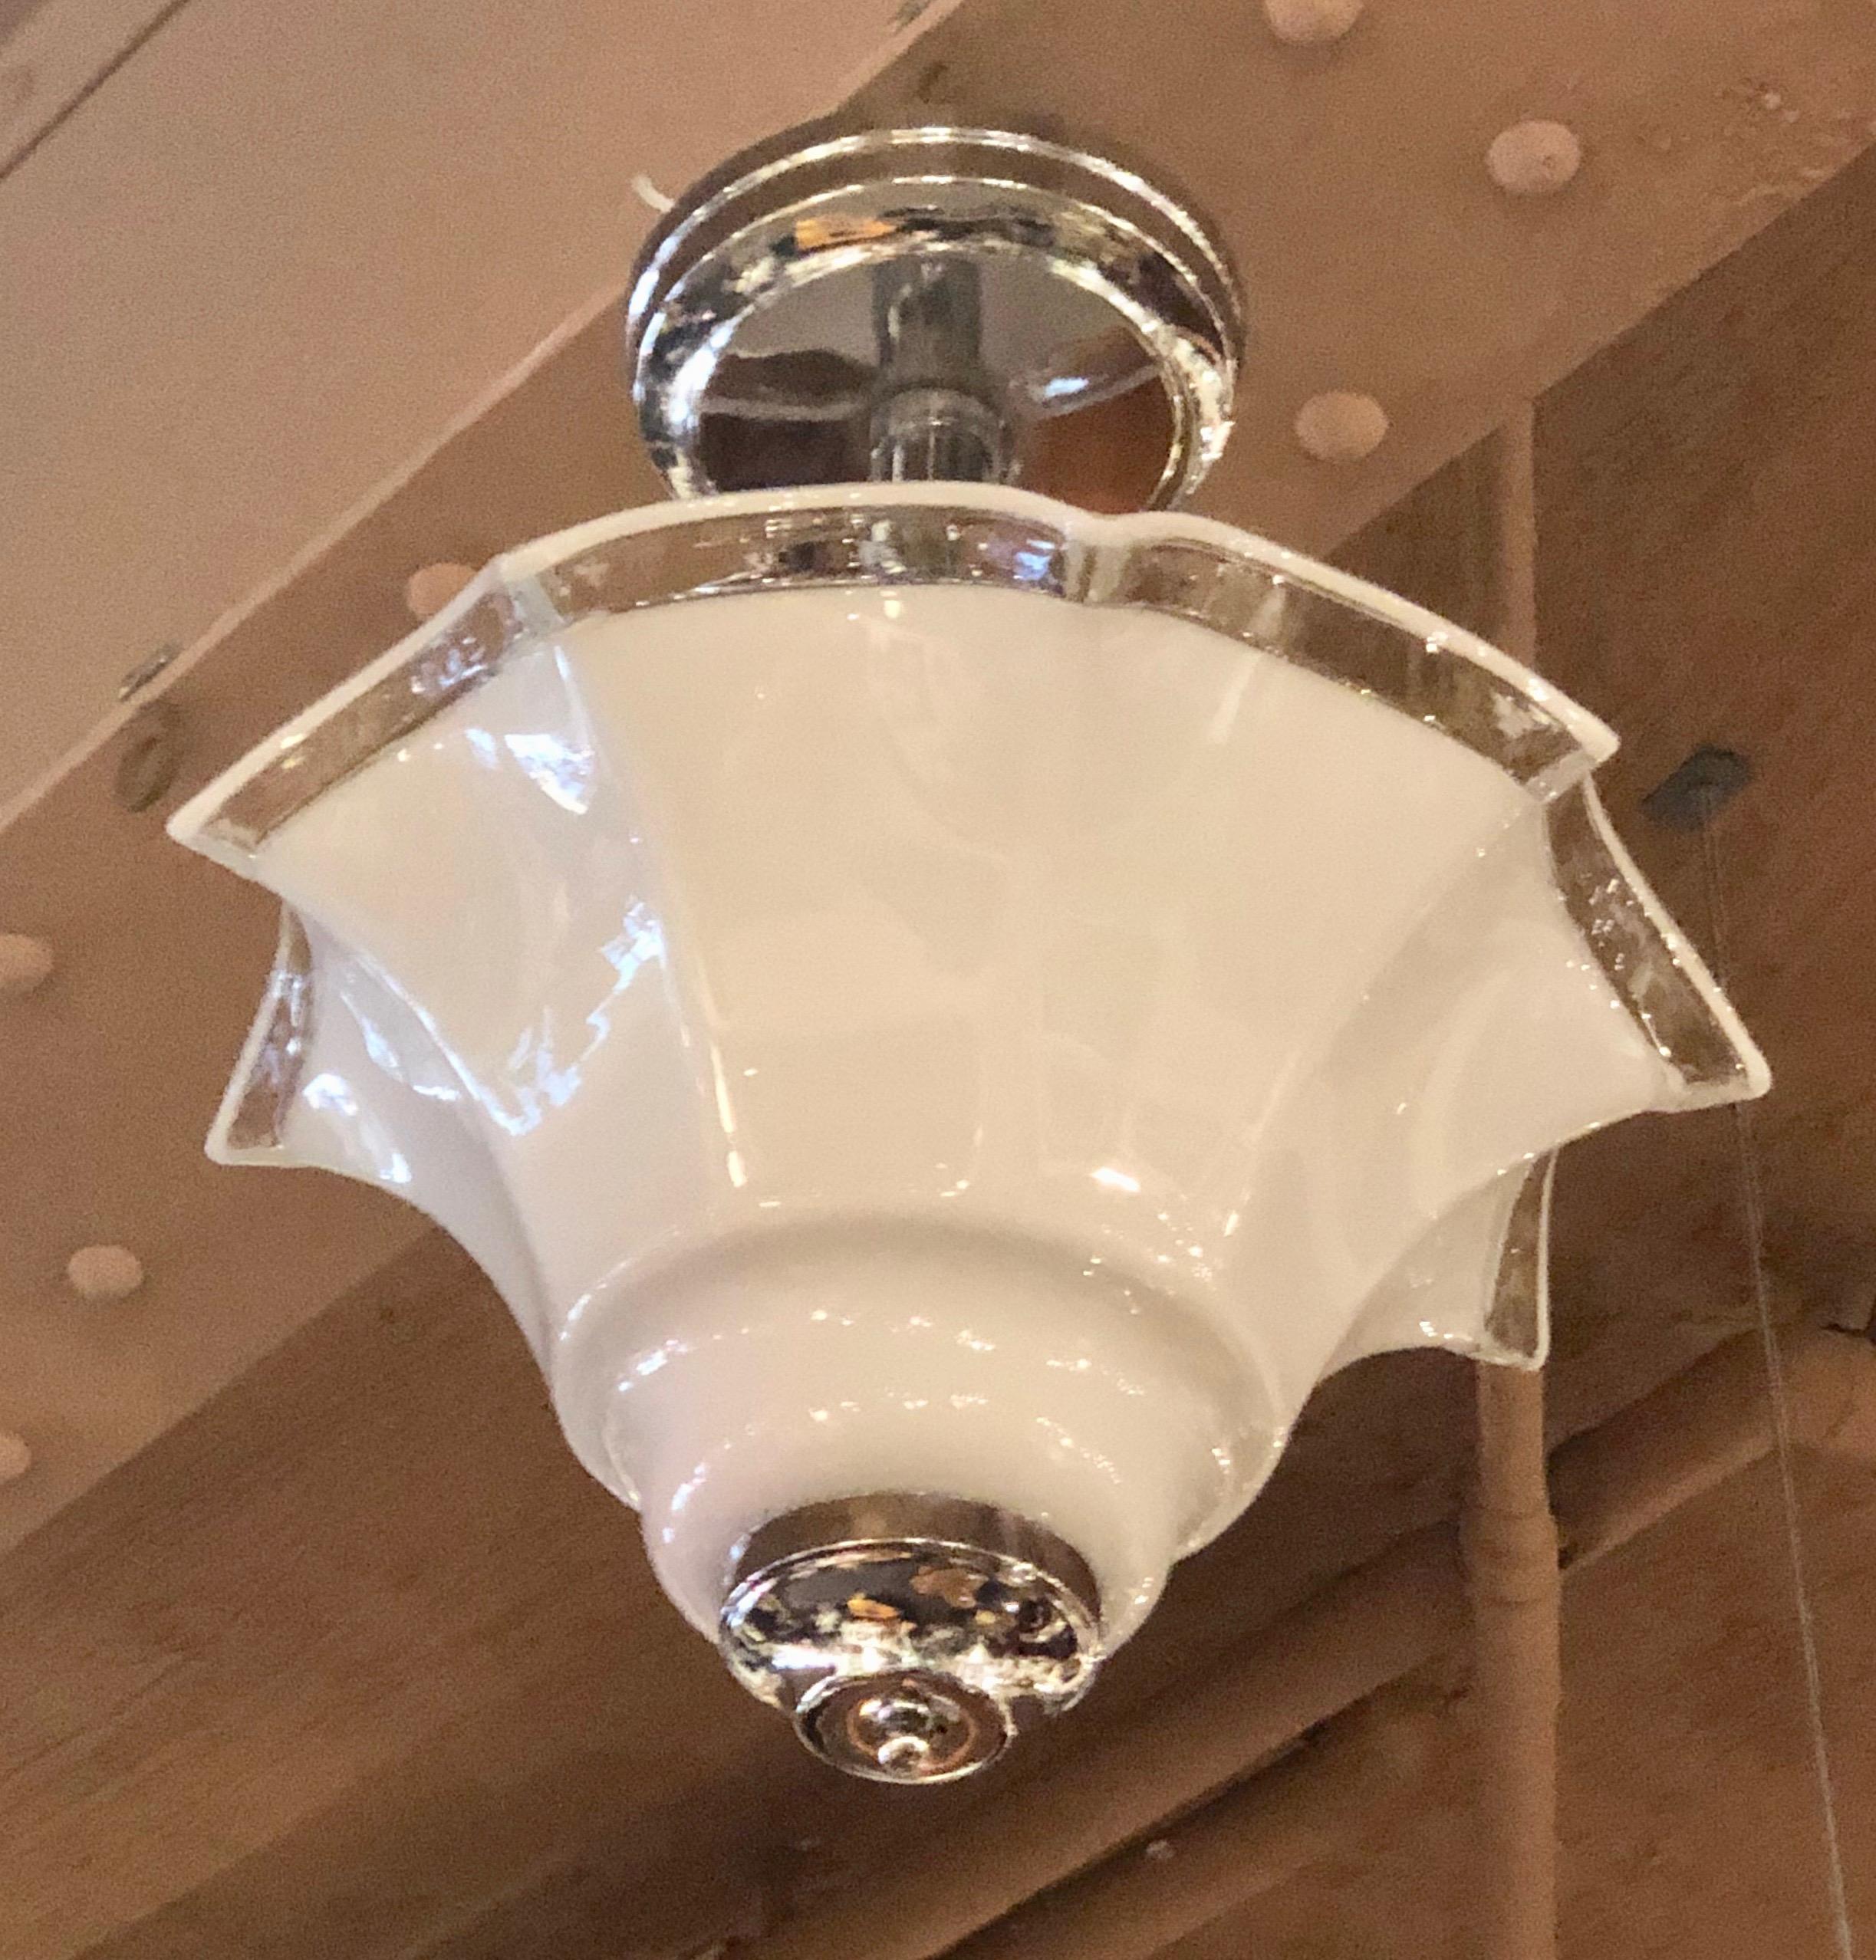 Beautiful flutted Murano style milk colored glass chandelier. Nice original excellent condition chrome hanging assembly. We have two matching fixtures to offer, each has 3 sockets. Open top allows all kinds of wattage using American style standard